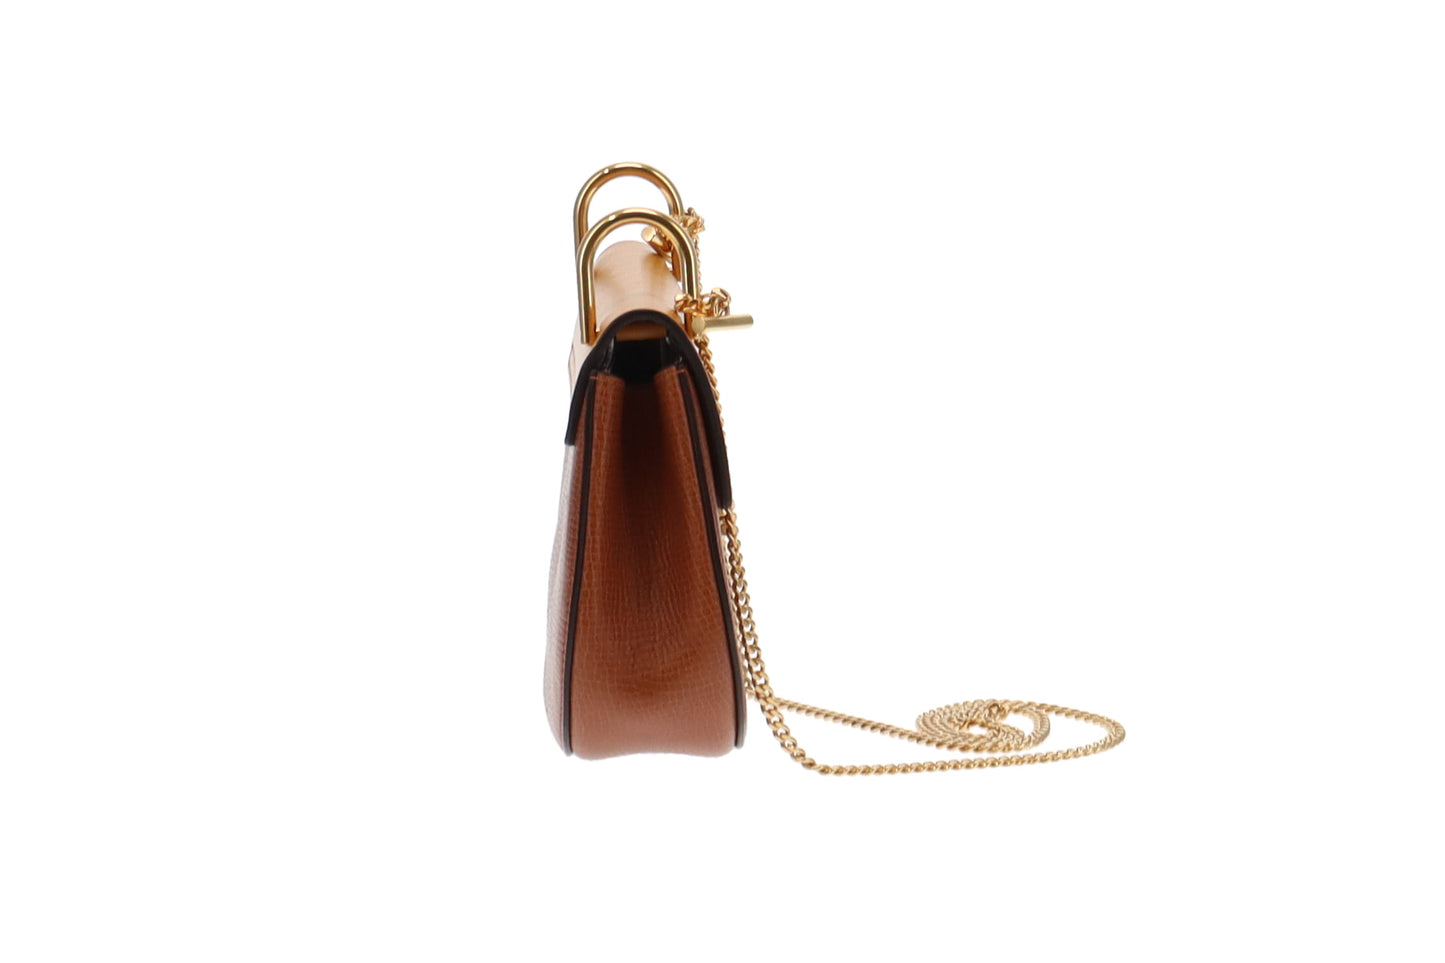 Chloe Tan Grained Leather and Mustard Smooth Leather Mini Drew